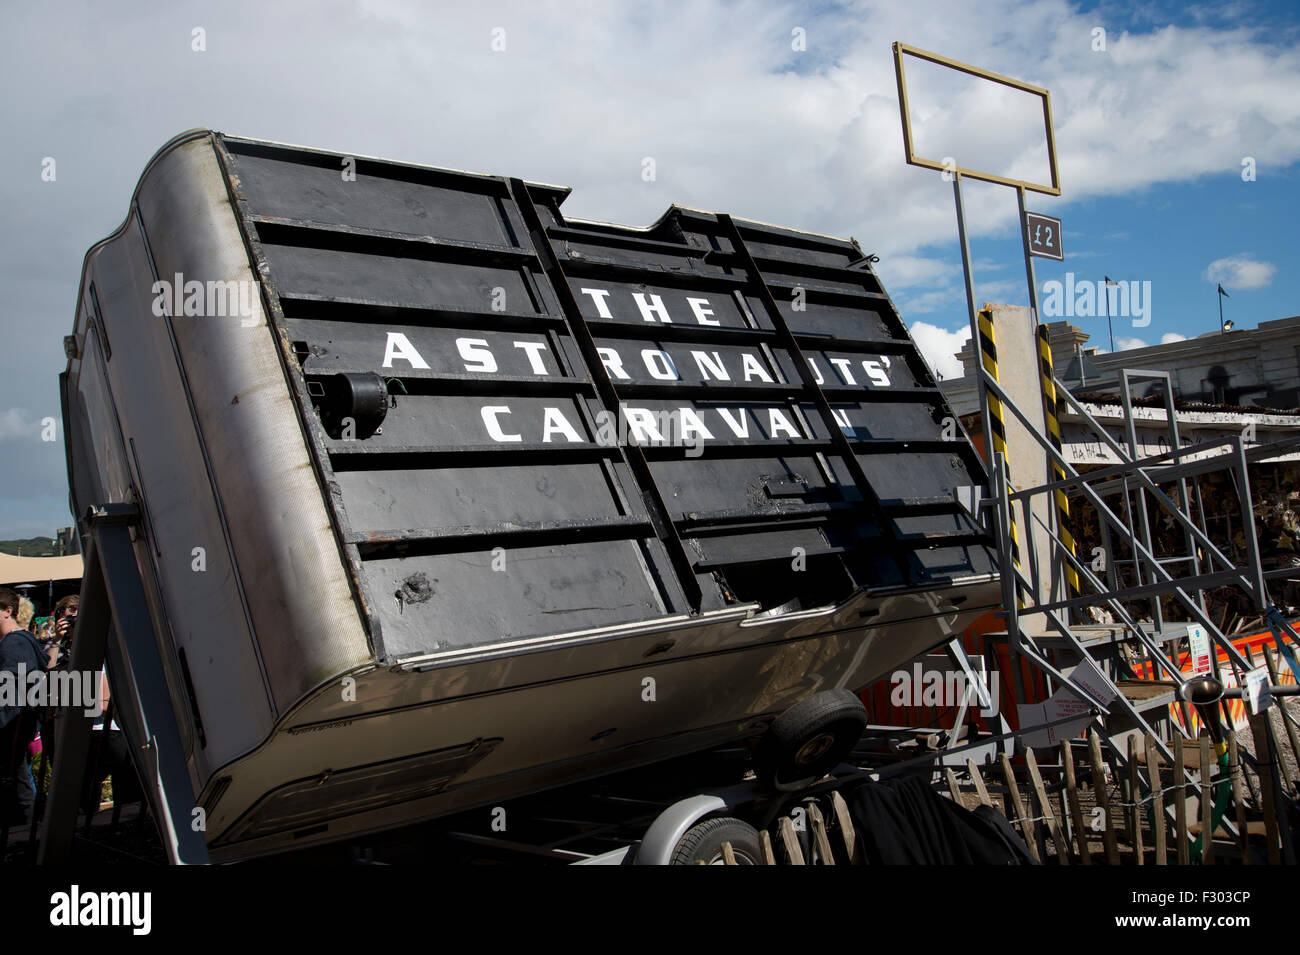 Dismaland, Bemusement Park, organised by Banksy .The Astronaut's caravan by Tim Hunkin and Andy Plant. Stock Photo